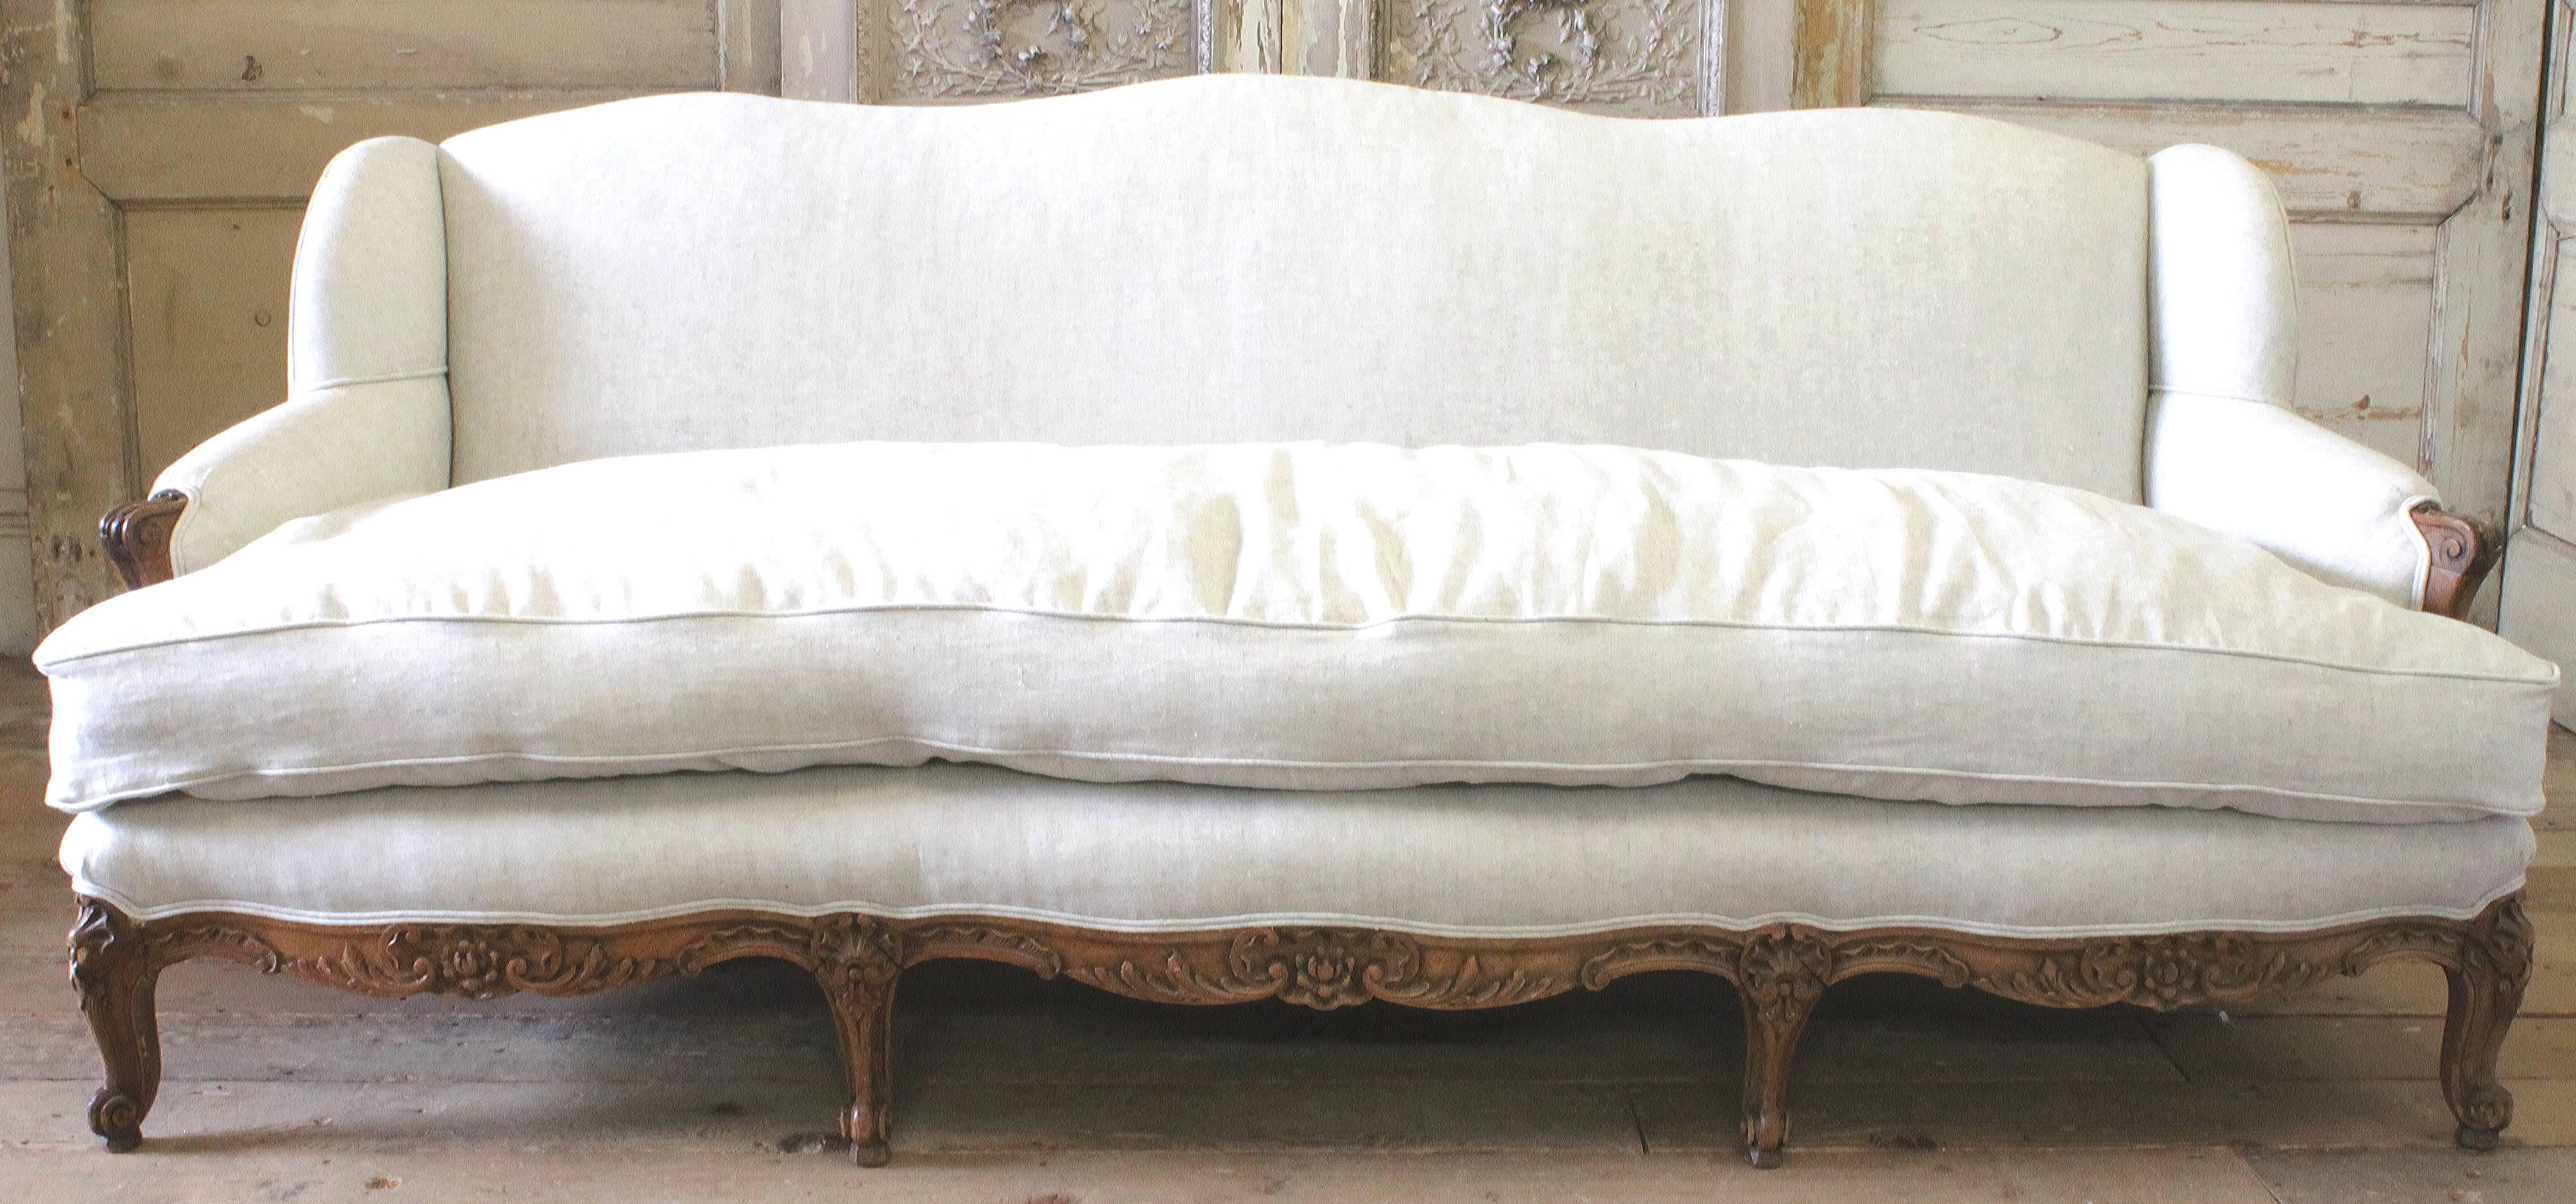 20th Century French Country Louis XV Sofa in Belgian Linen